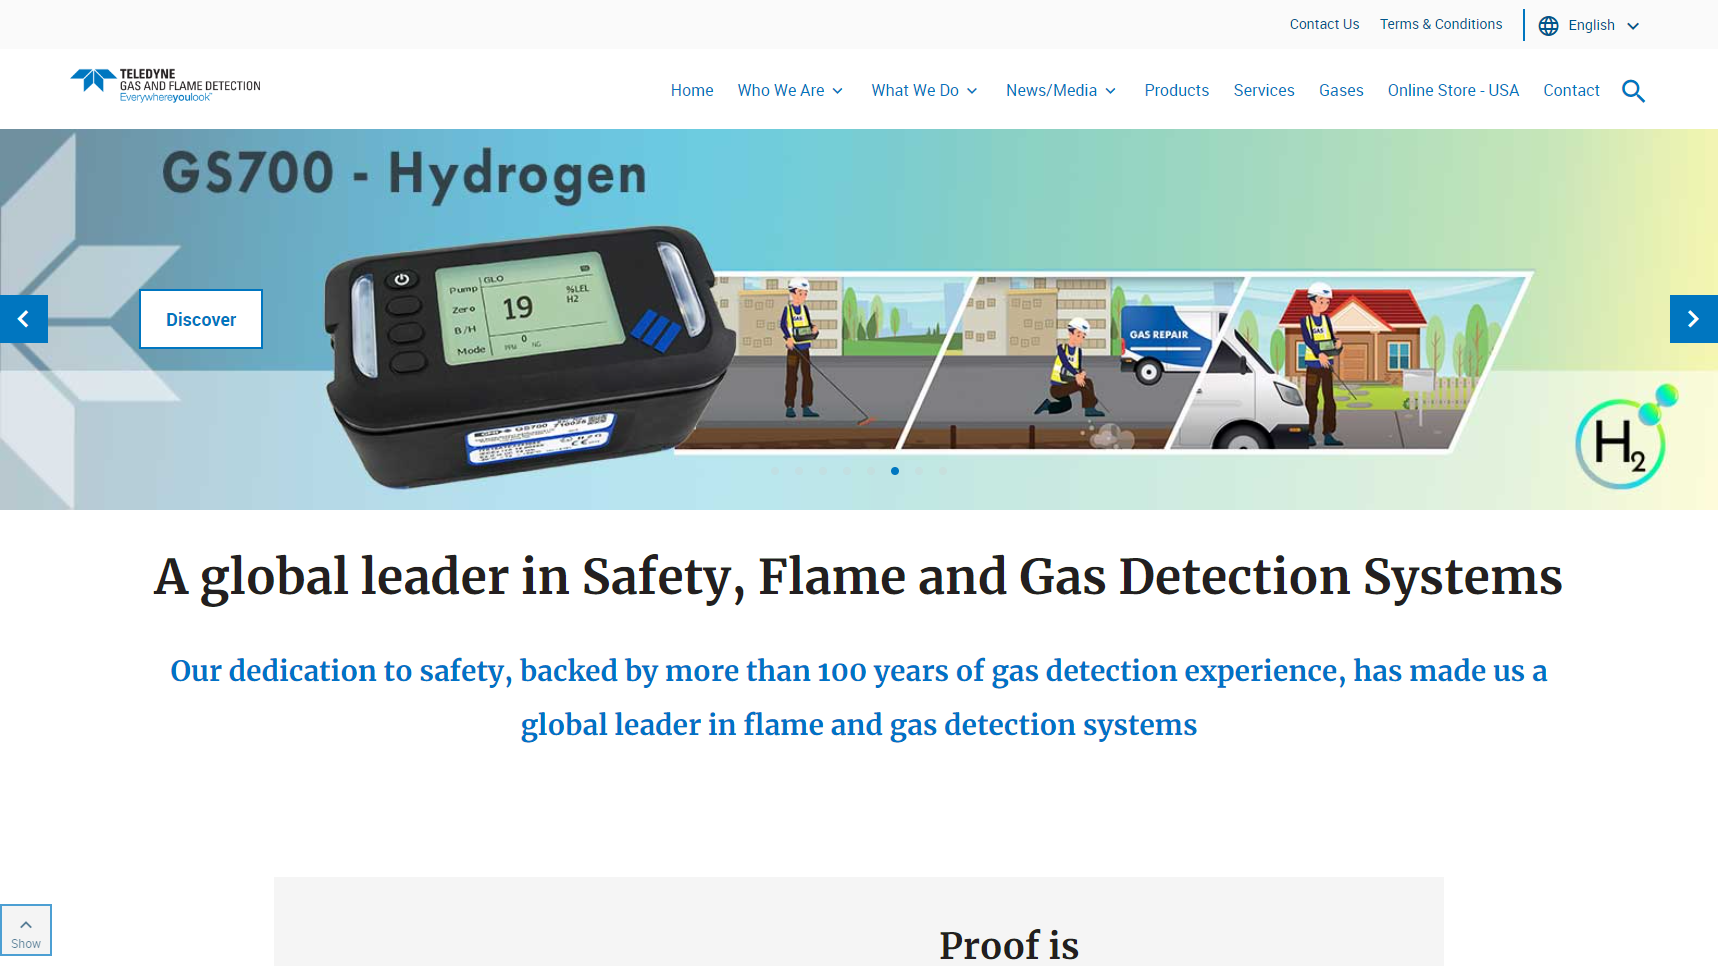 Teledyne Gas and Flame Detection - Gas Detector Manufacturer